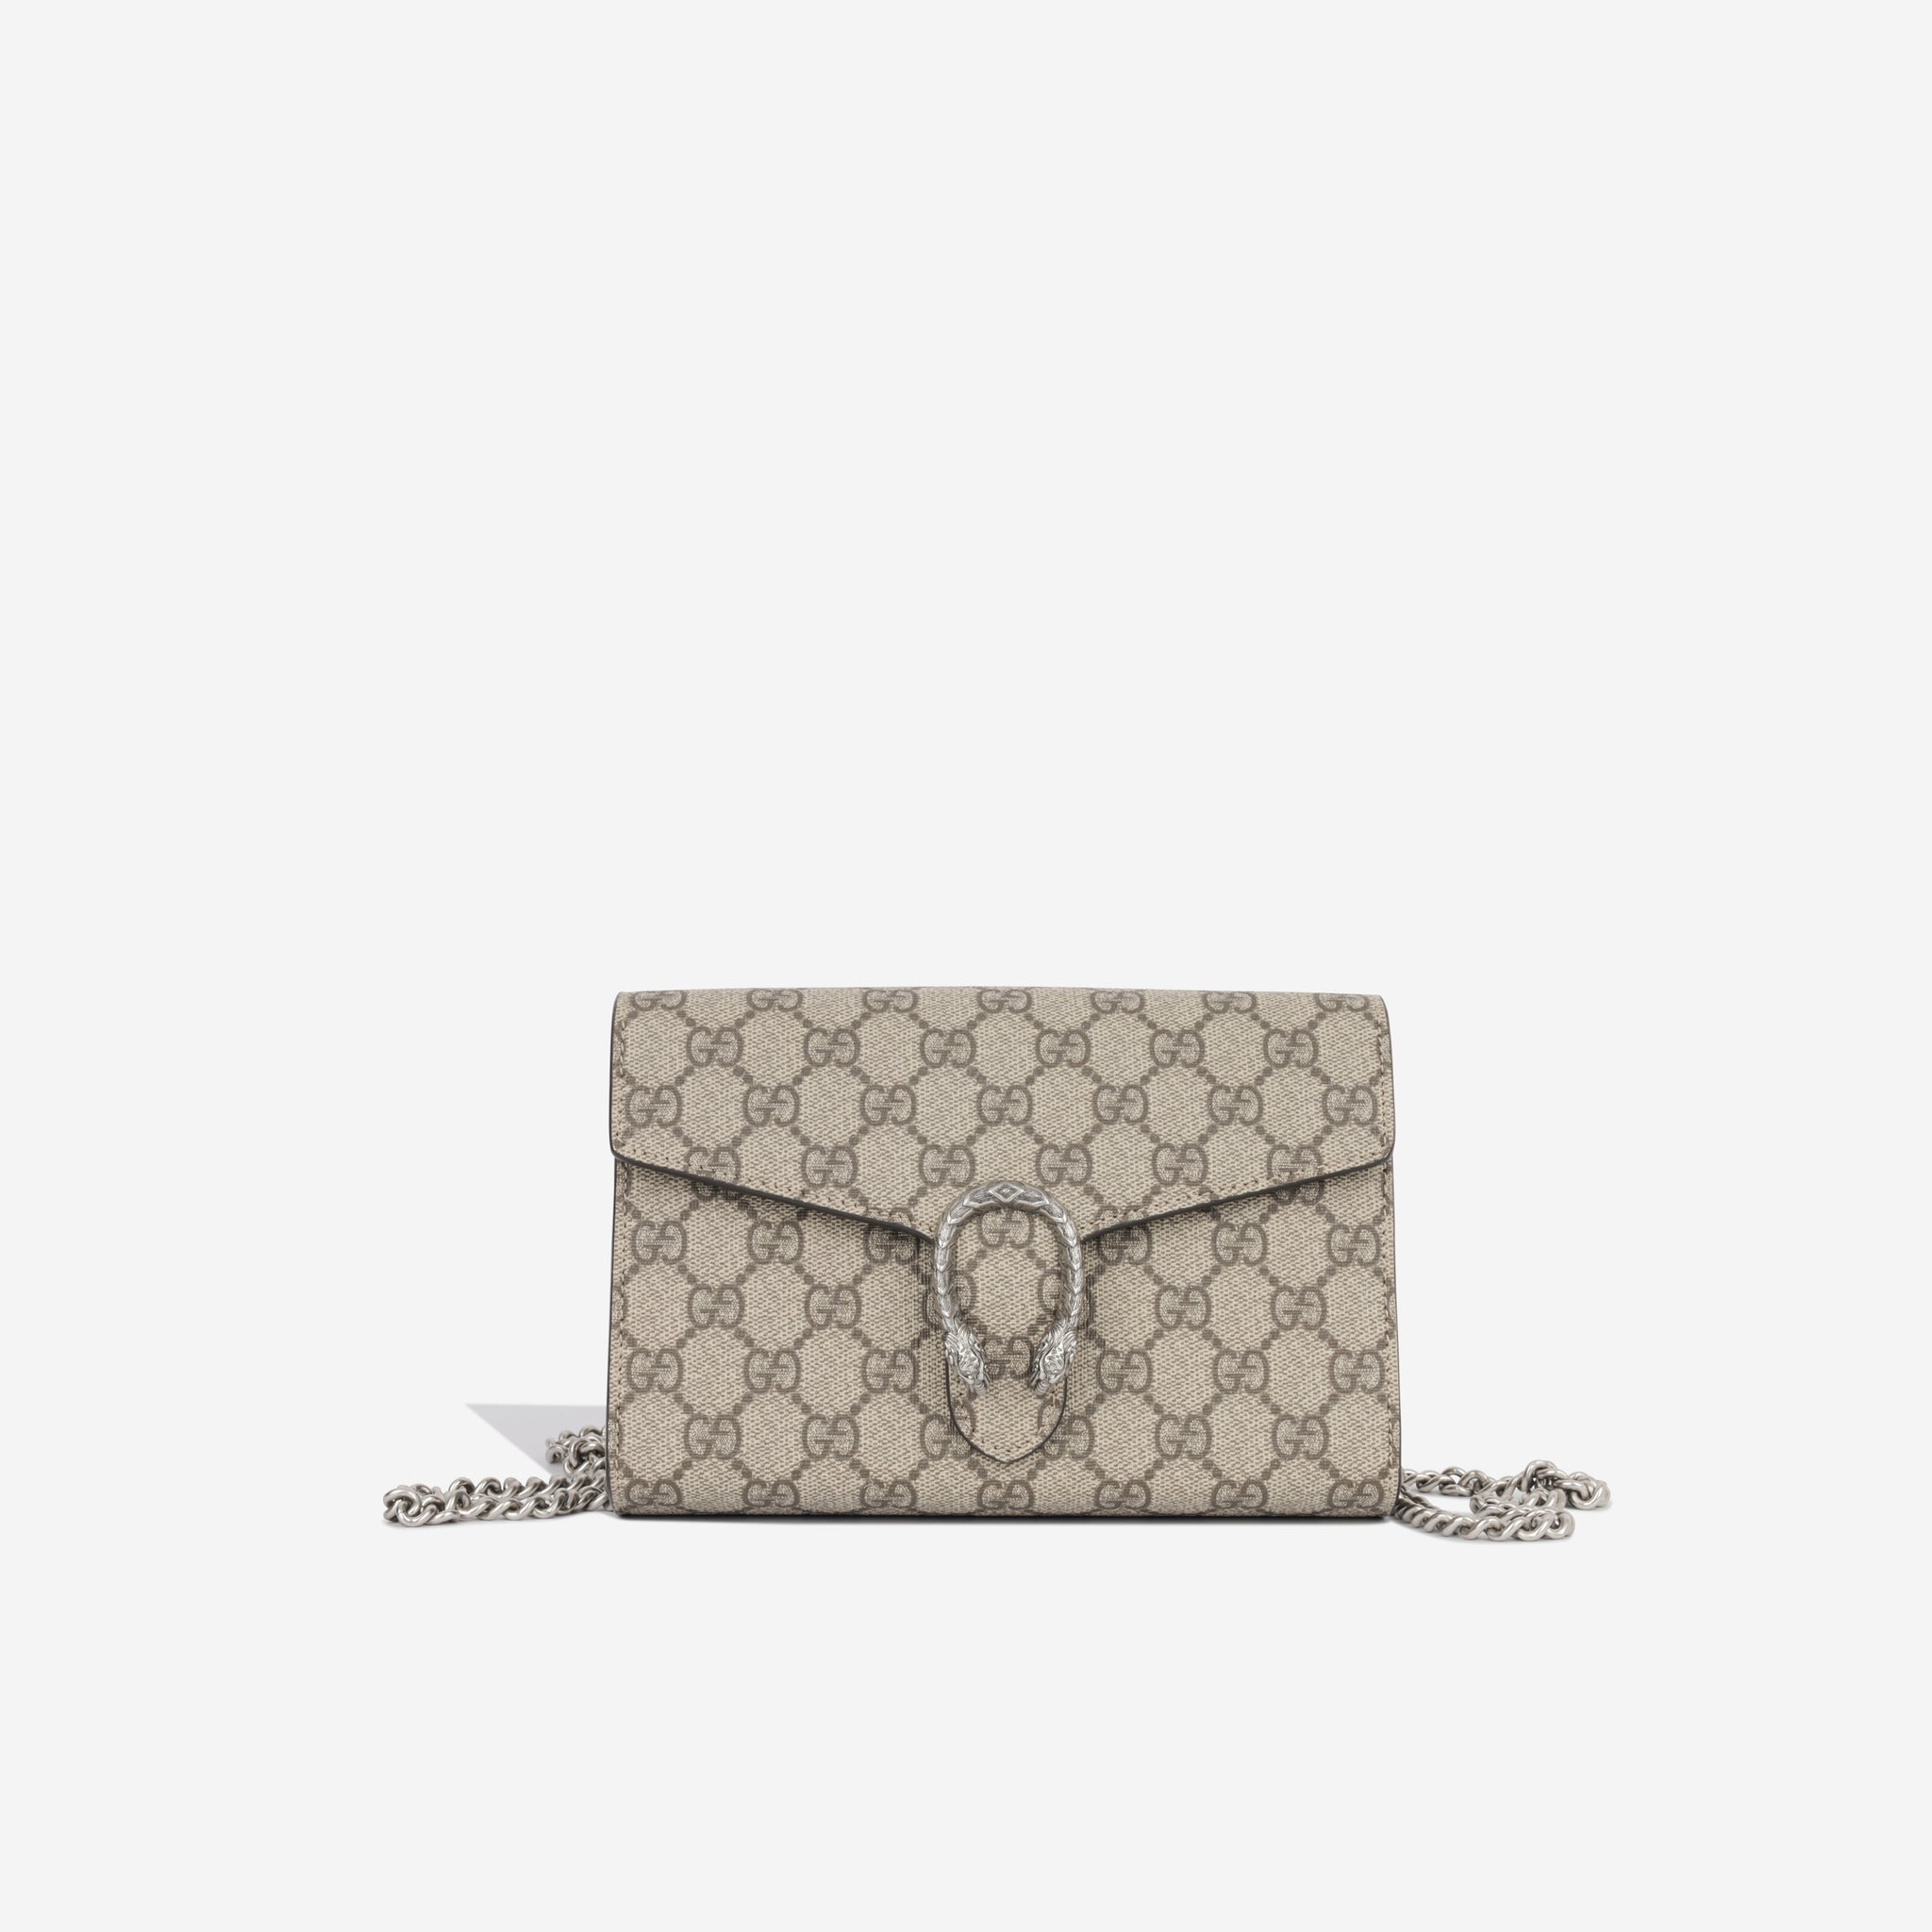 Gucci Dionysus GG Supreme Chain Wallet, WOC, Review